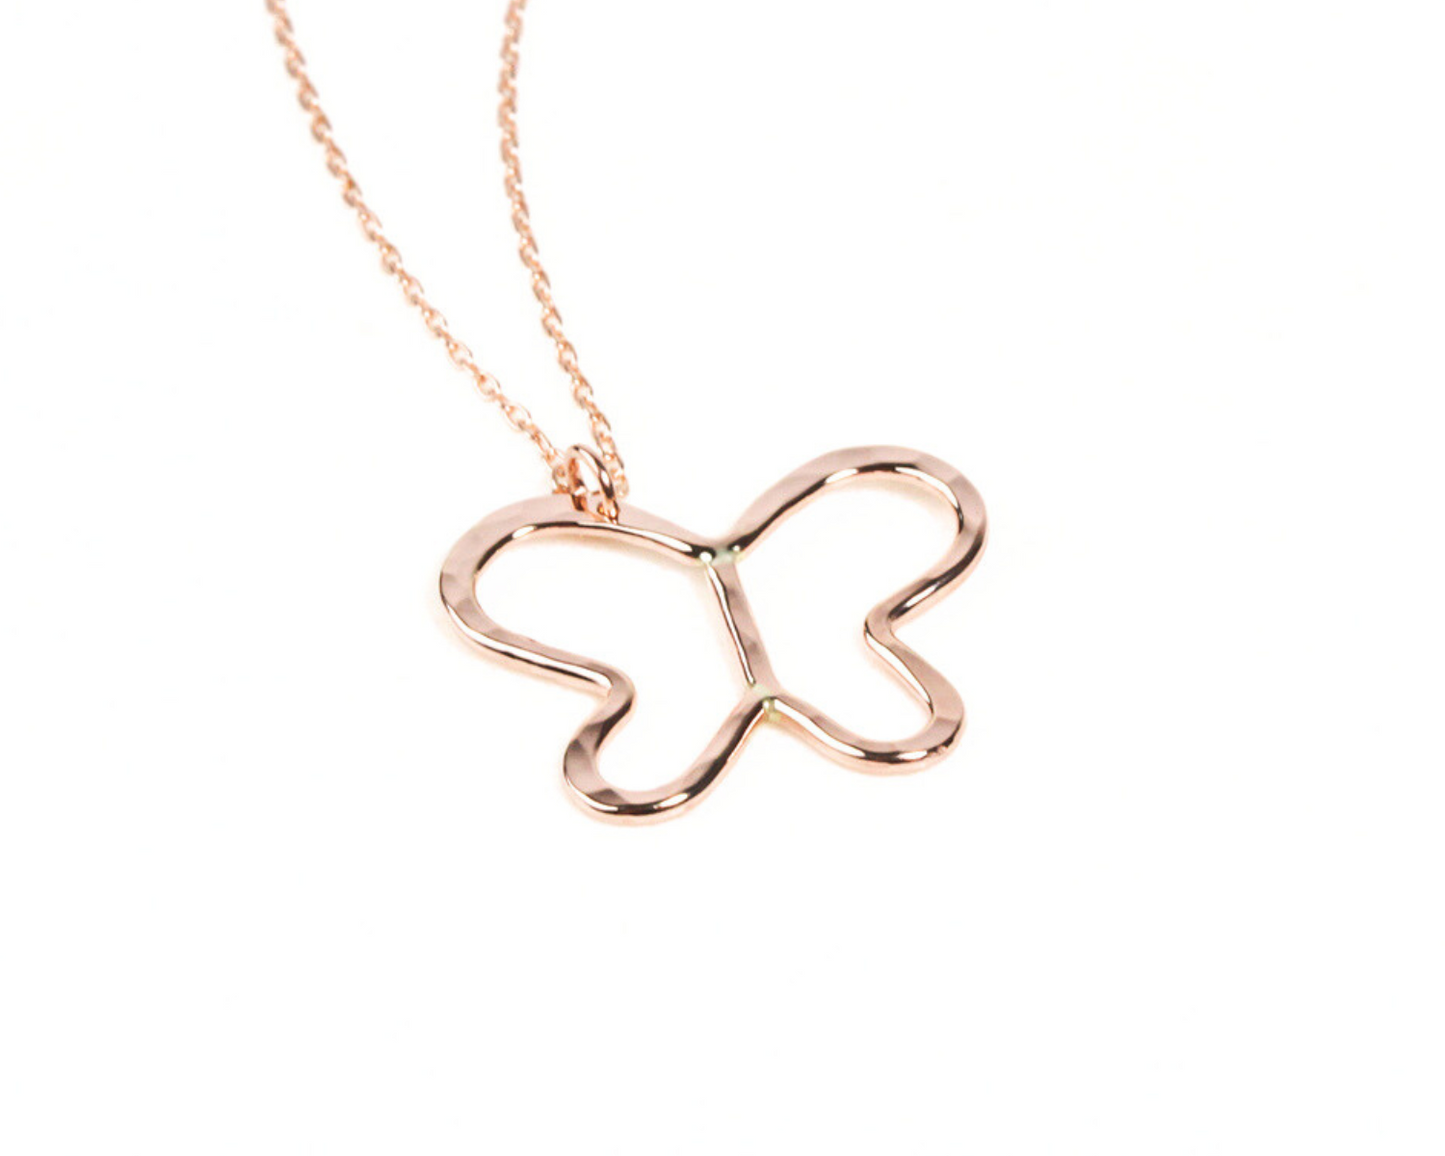 This whimsical treasure makes a perfect gardener gift, plant mom gift, or a meaningful keepsake for anyone taking flight on a new journey. Pair with our matching Butterfly Ring for an all-over sparkle. Offered in sterling, rose gold or gold filled.